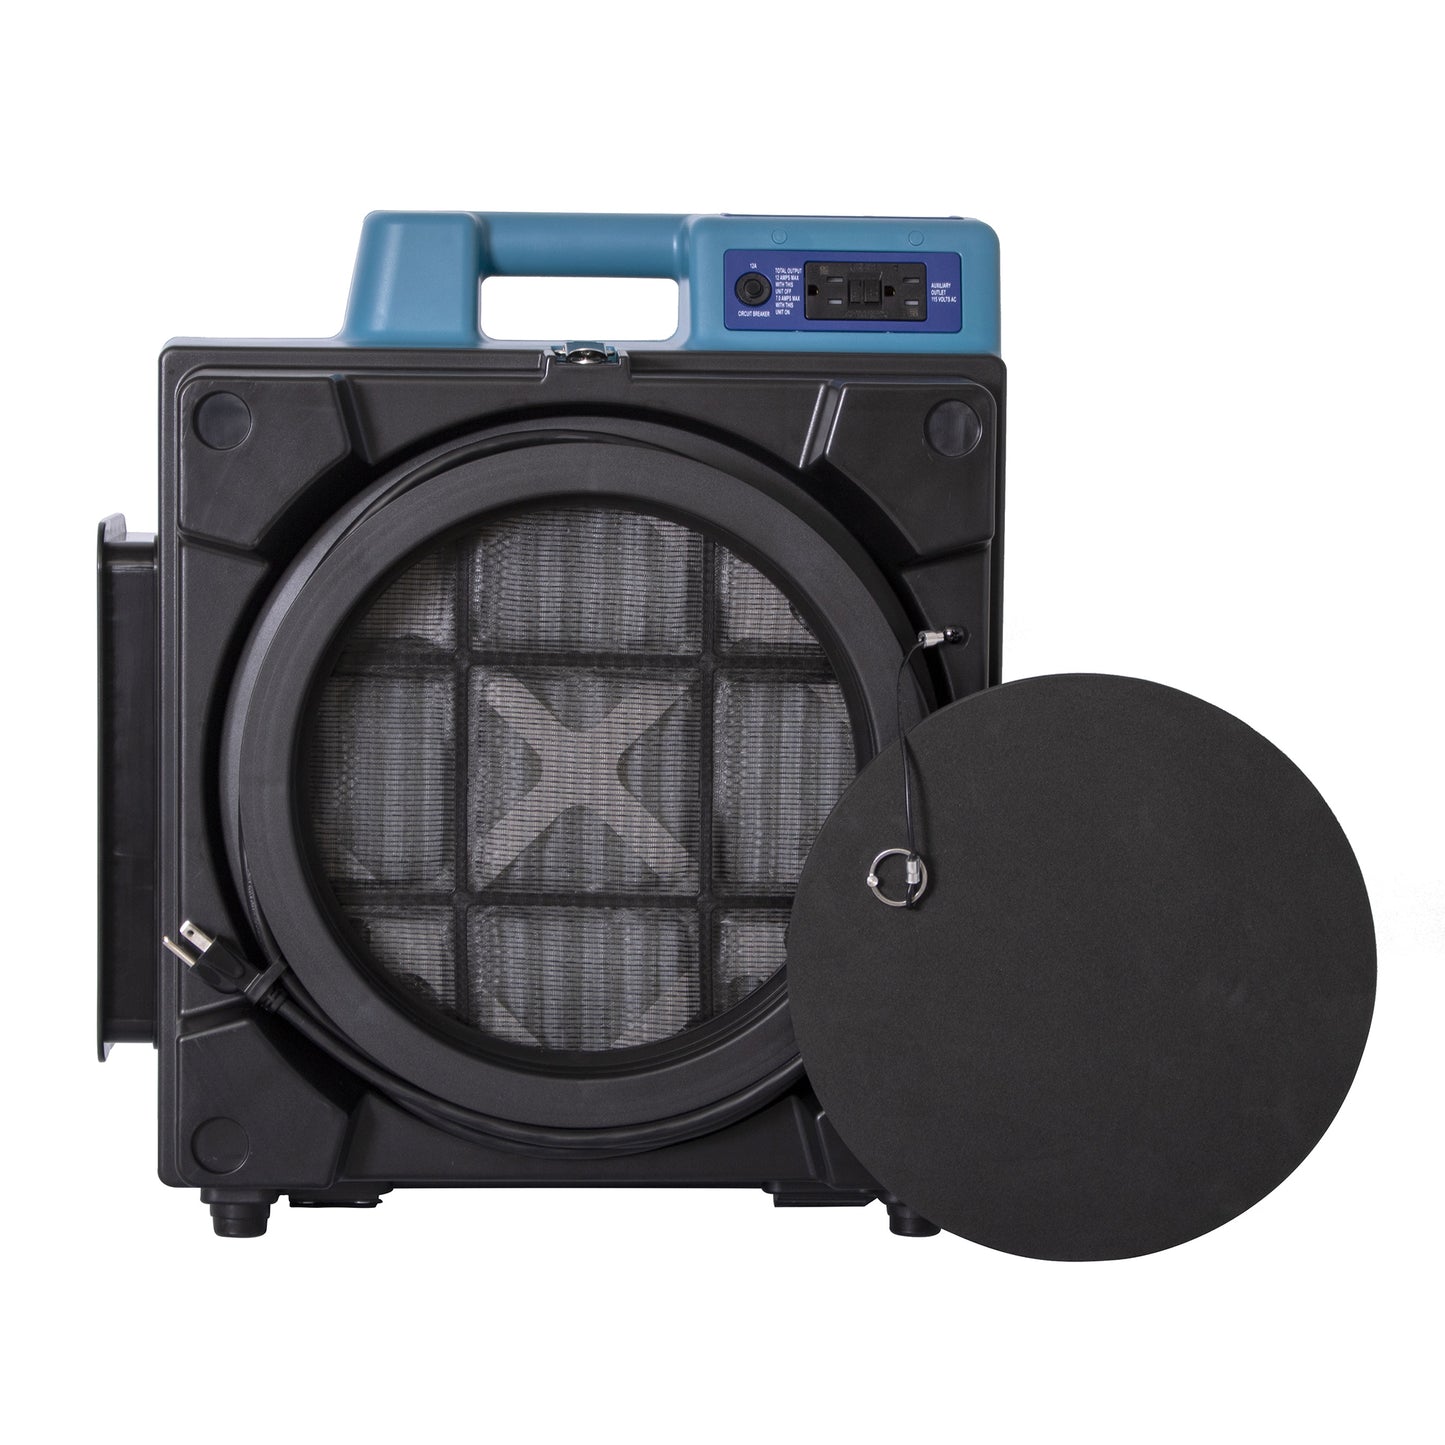 Commercial Air Scrubber, 750 CFM, Multi-Layer HEPA Filtration, 8" Ducting